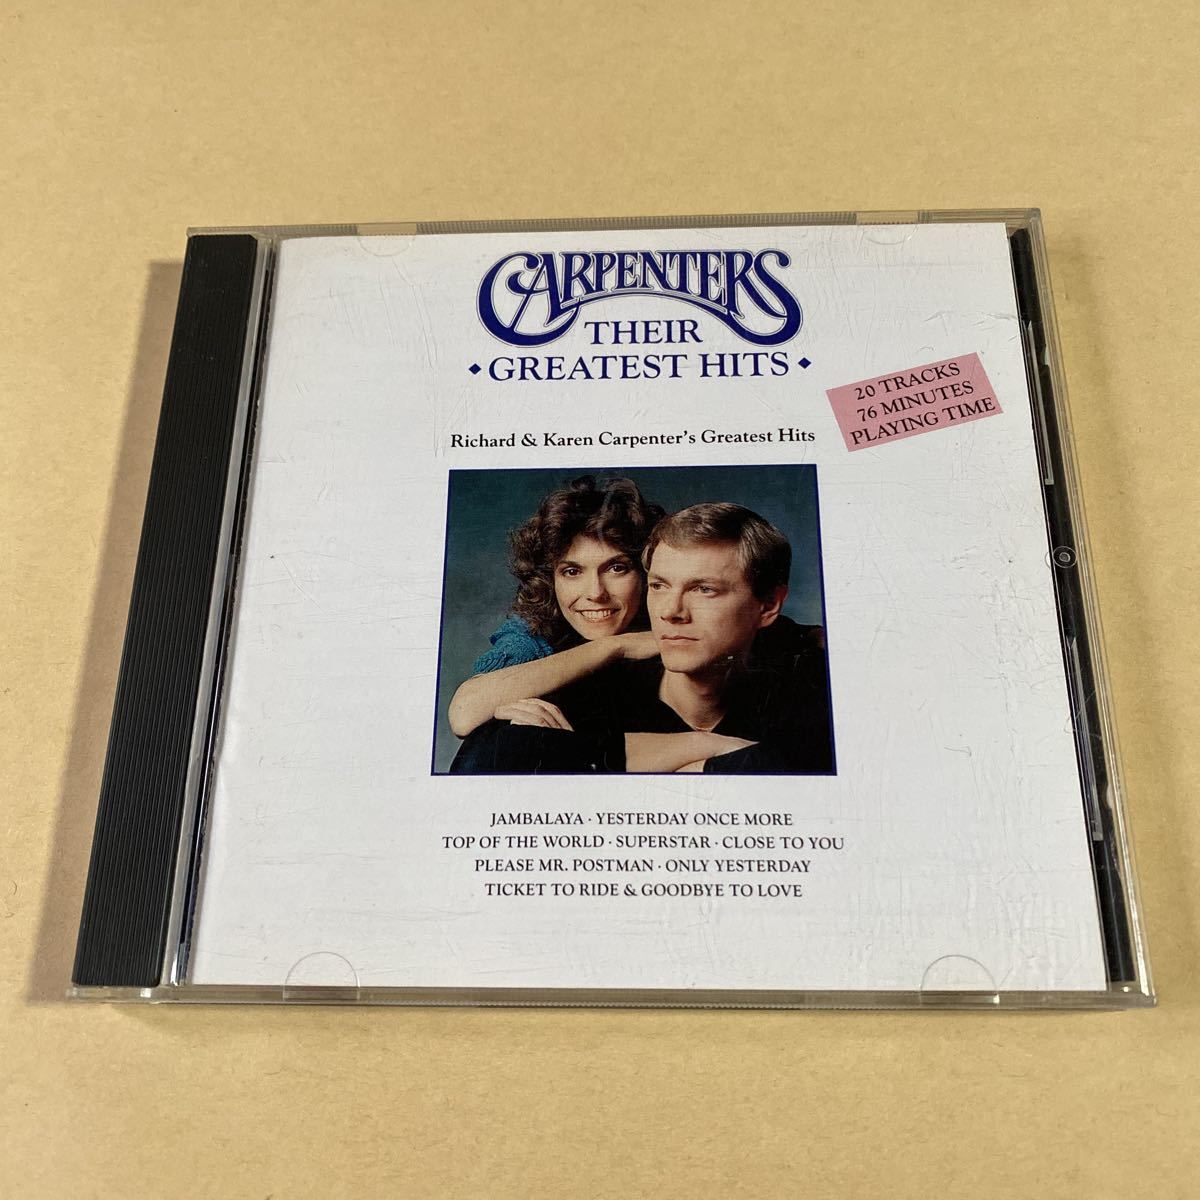 Carpenters 1CD「THEIR GREATEST HITS」_画像1